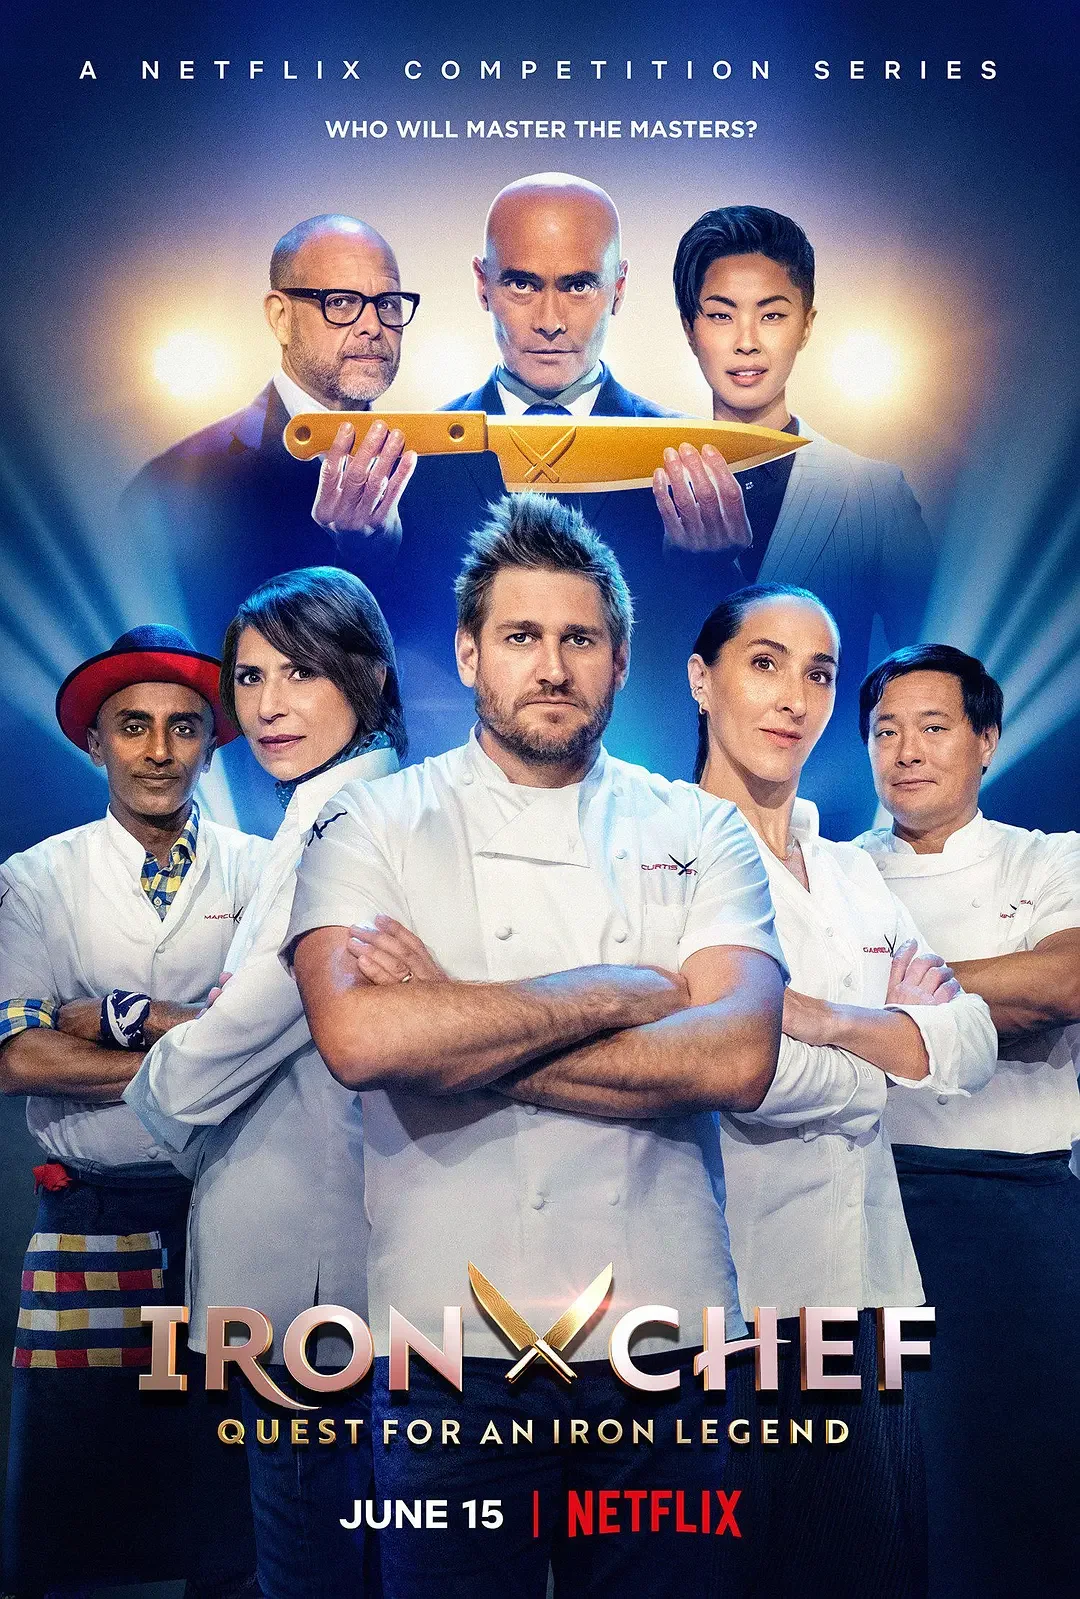 "Iron Chef: Quest for an Iron Legend" release Official Trailer,it will premiere on June 15